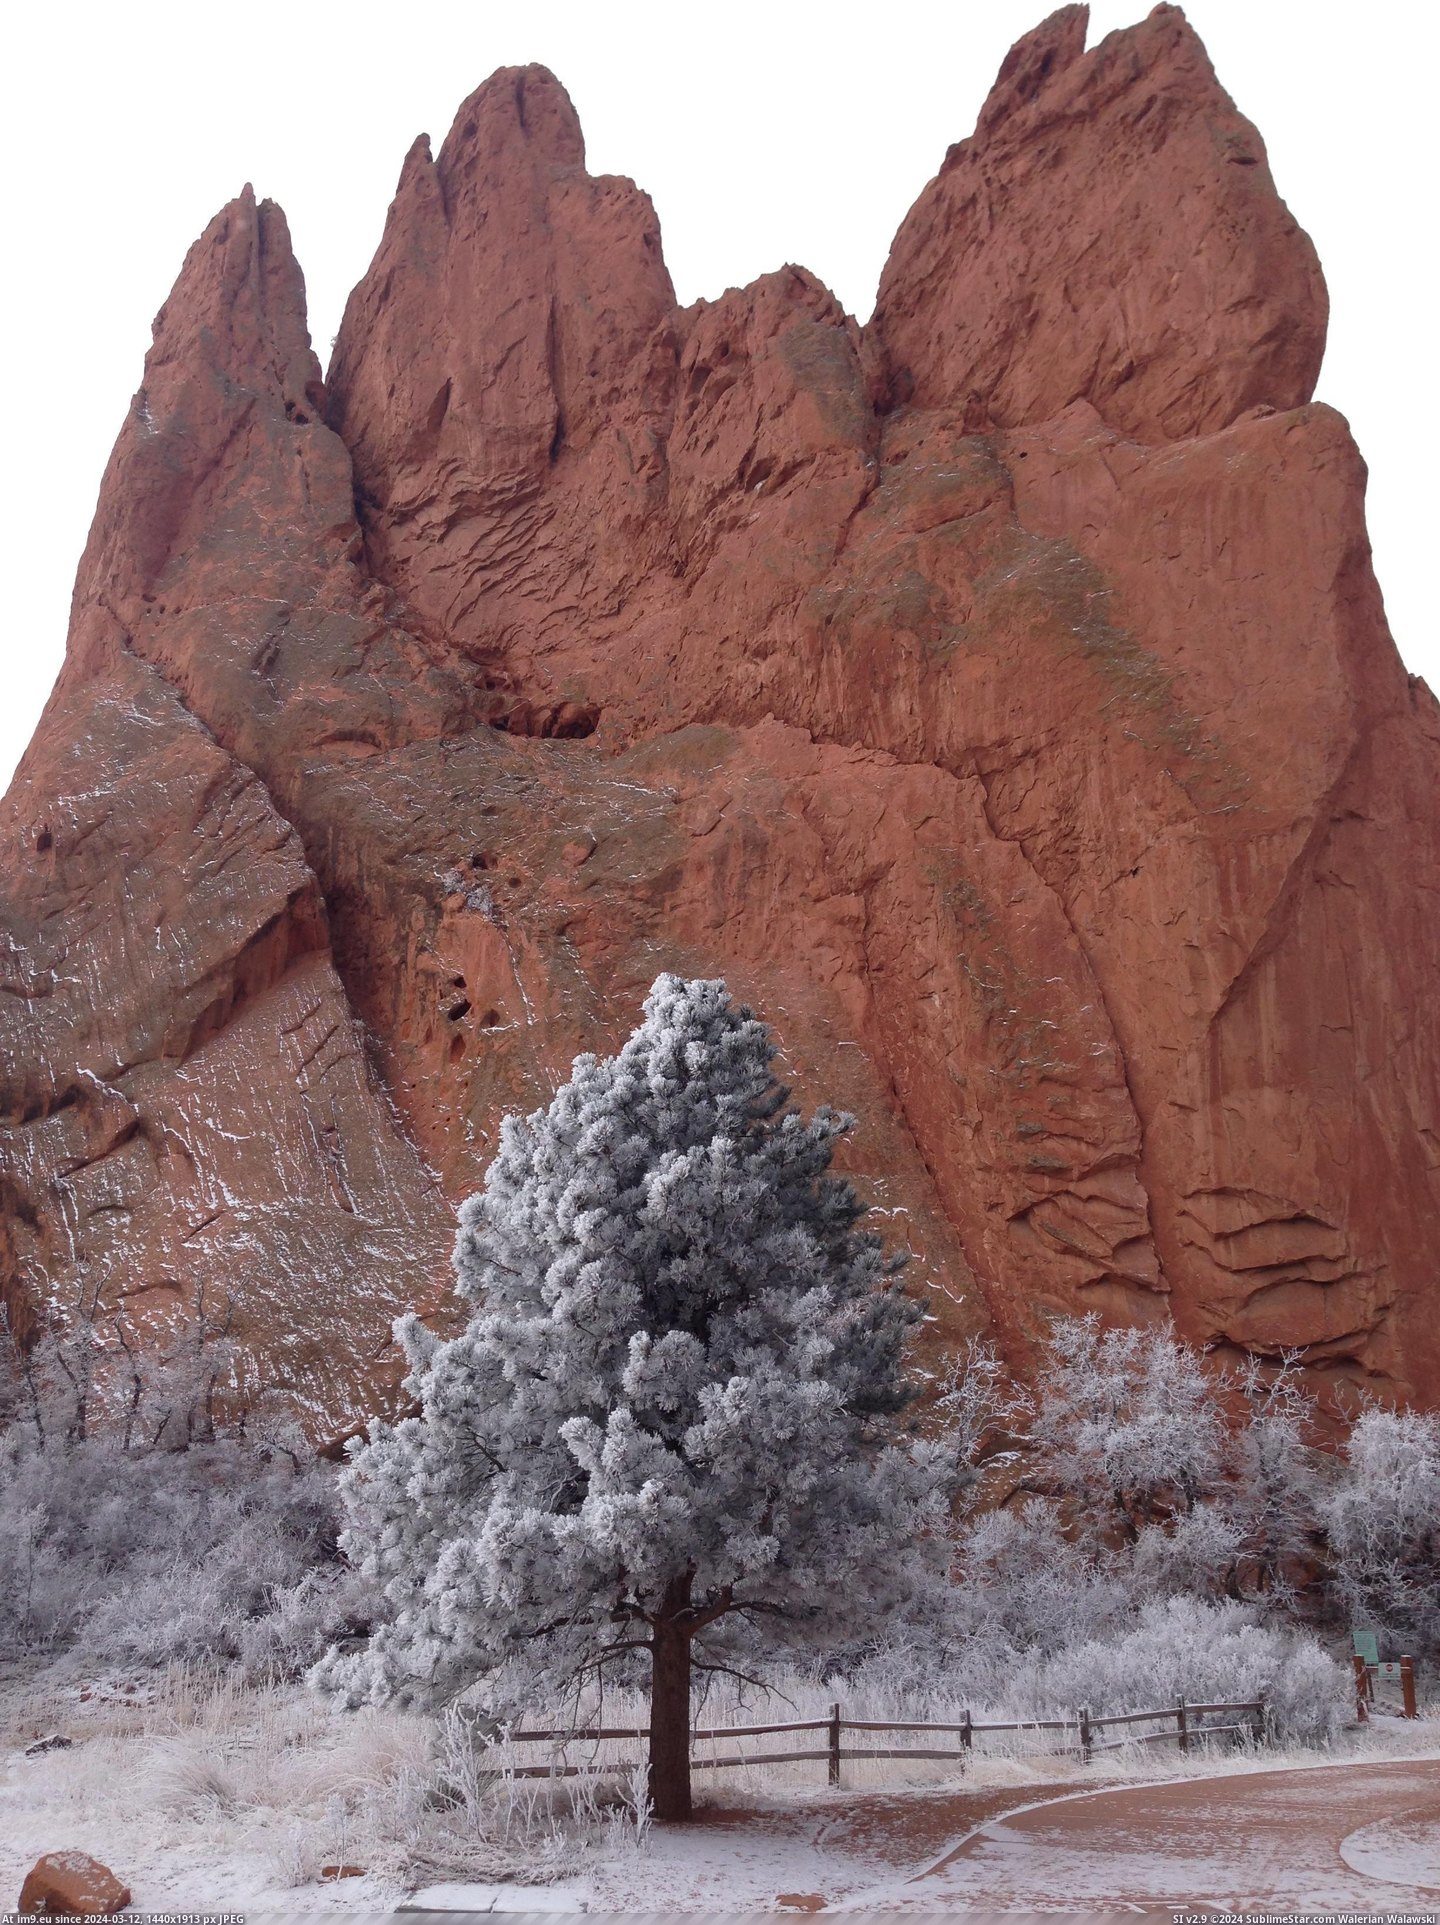 #Picture #February #Gods #Garden [Earthporn] Picture of the Garden of the Gods I took this February [2448 x 3264] Pic. (Image of album My r/EARTHPORN favs))